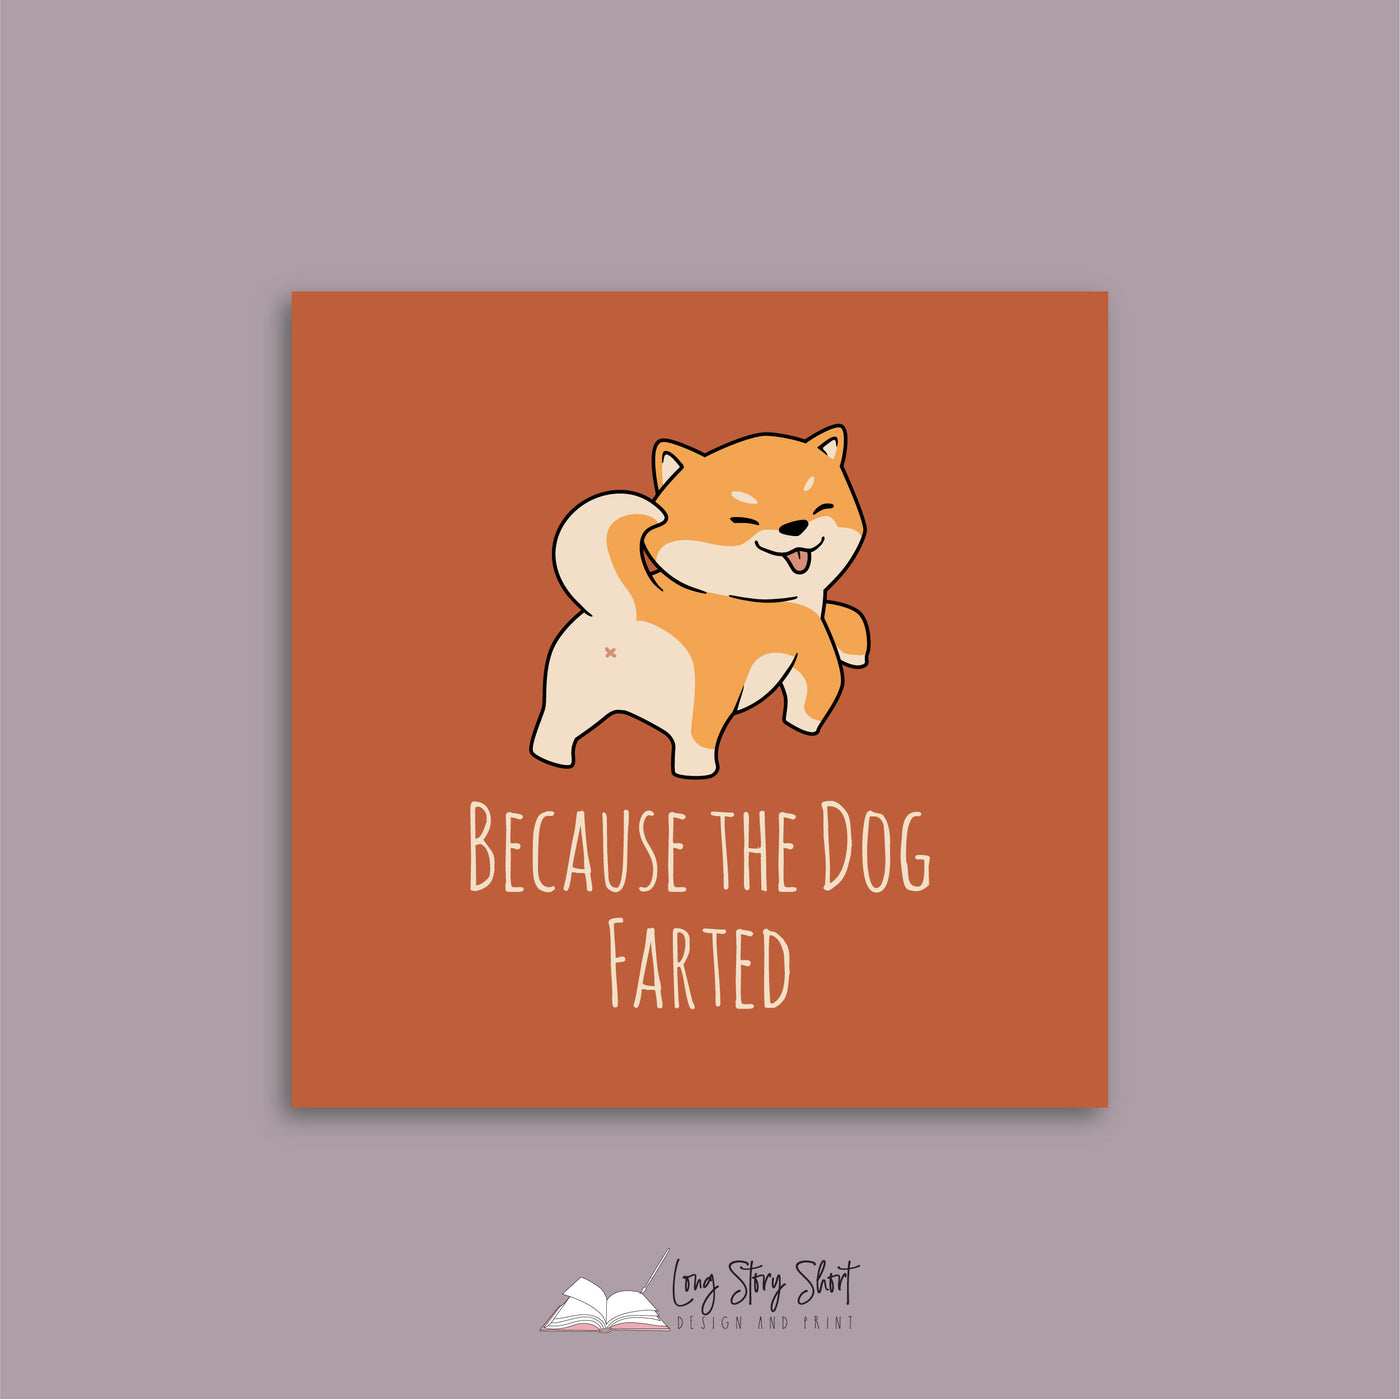 Because the dog farted Vinyl Label Pack